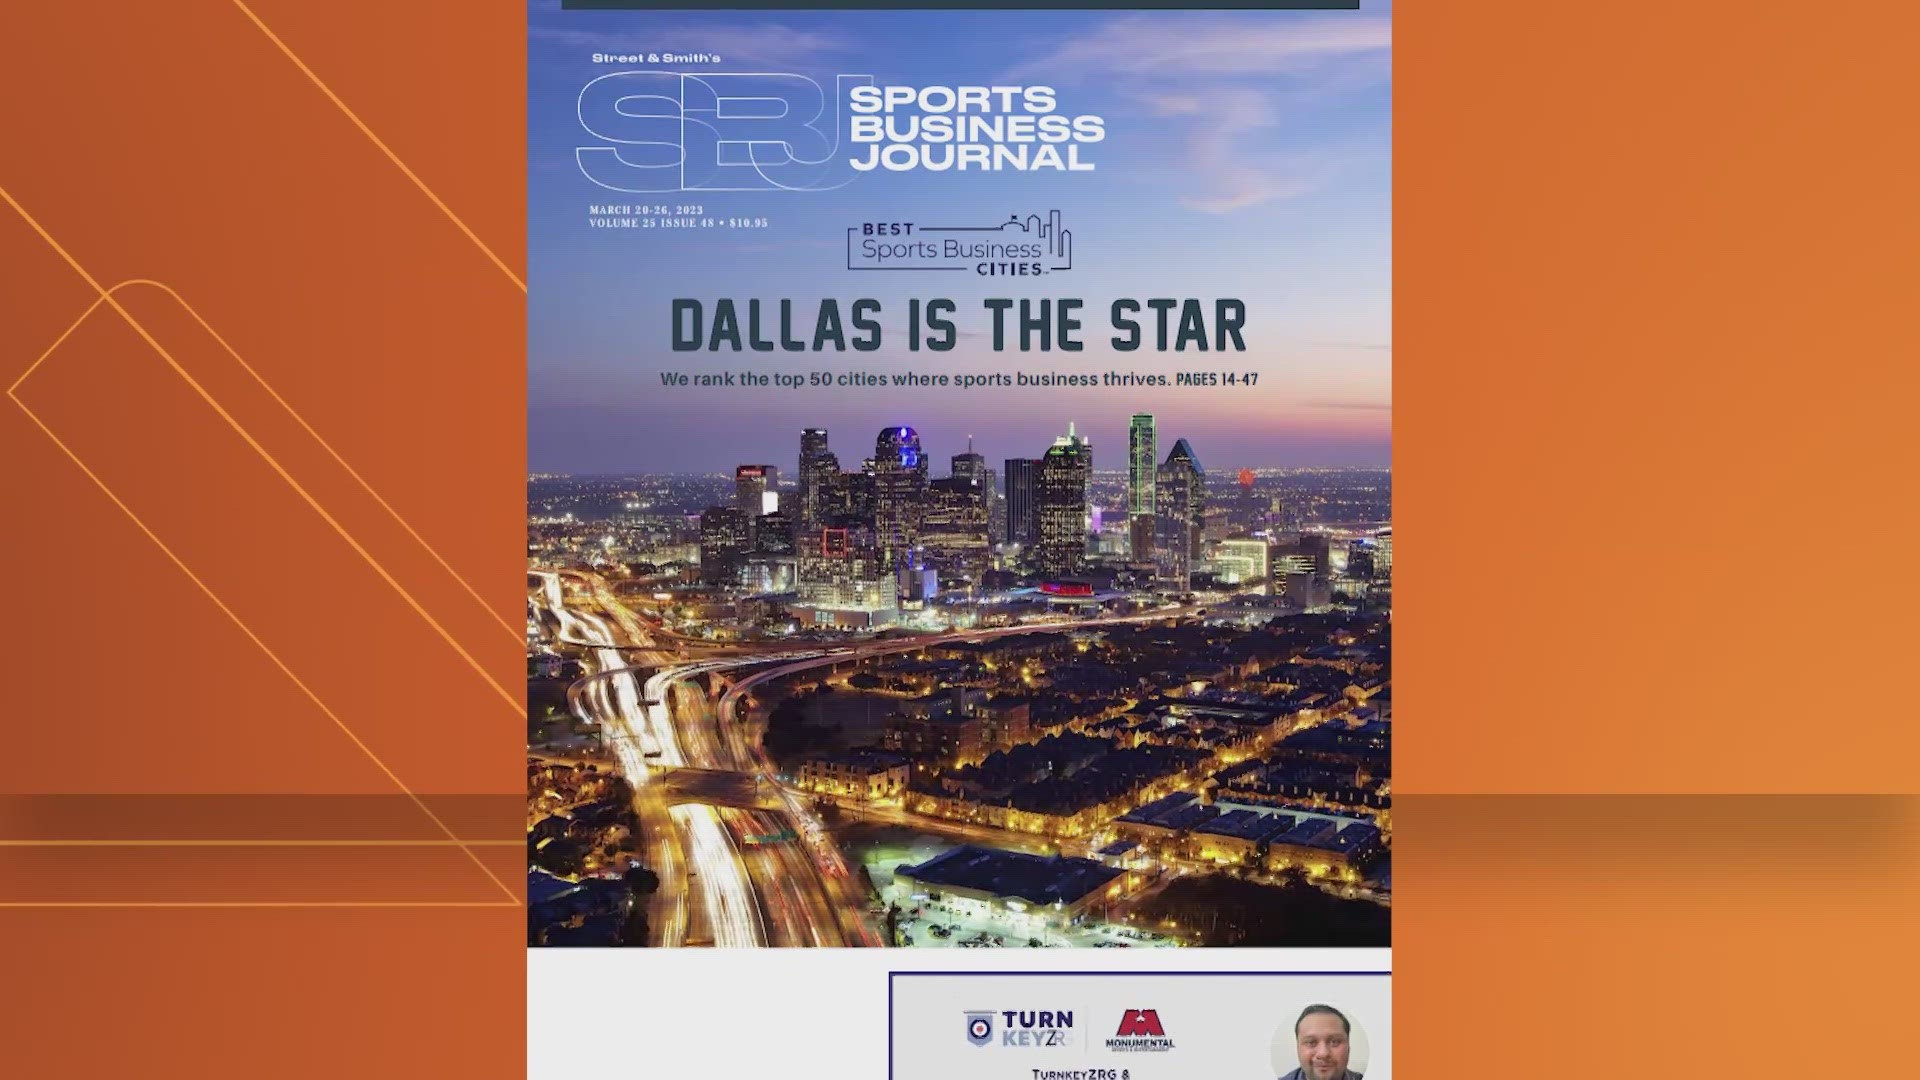 Dallas Named Americas Top Sports Business City